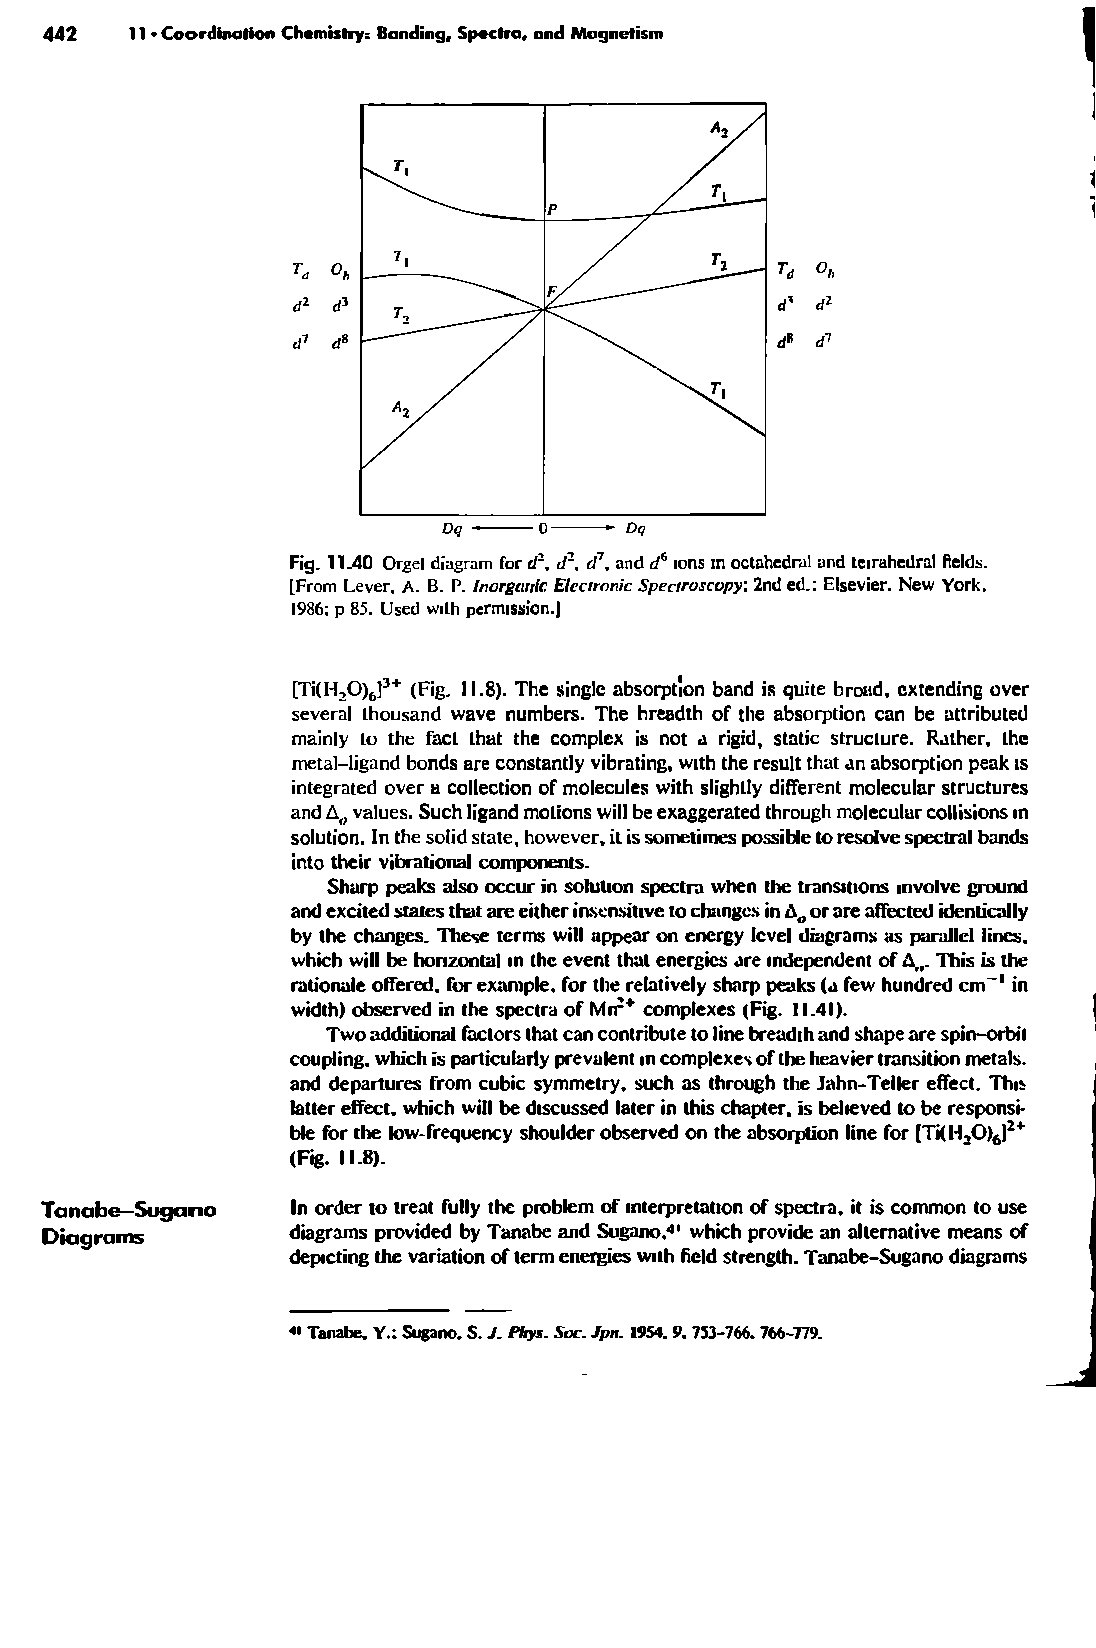 Fig. 11.40 Orgel diagram for d, d1, cl7, and d ions in octahedral and teirahedral fields. [From Lever. A. B. P. Inorganic Electronic Spectroscopy, 2nd ed. Elsevier. New York. 1986 p 85. Used with permission.)...